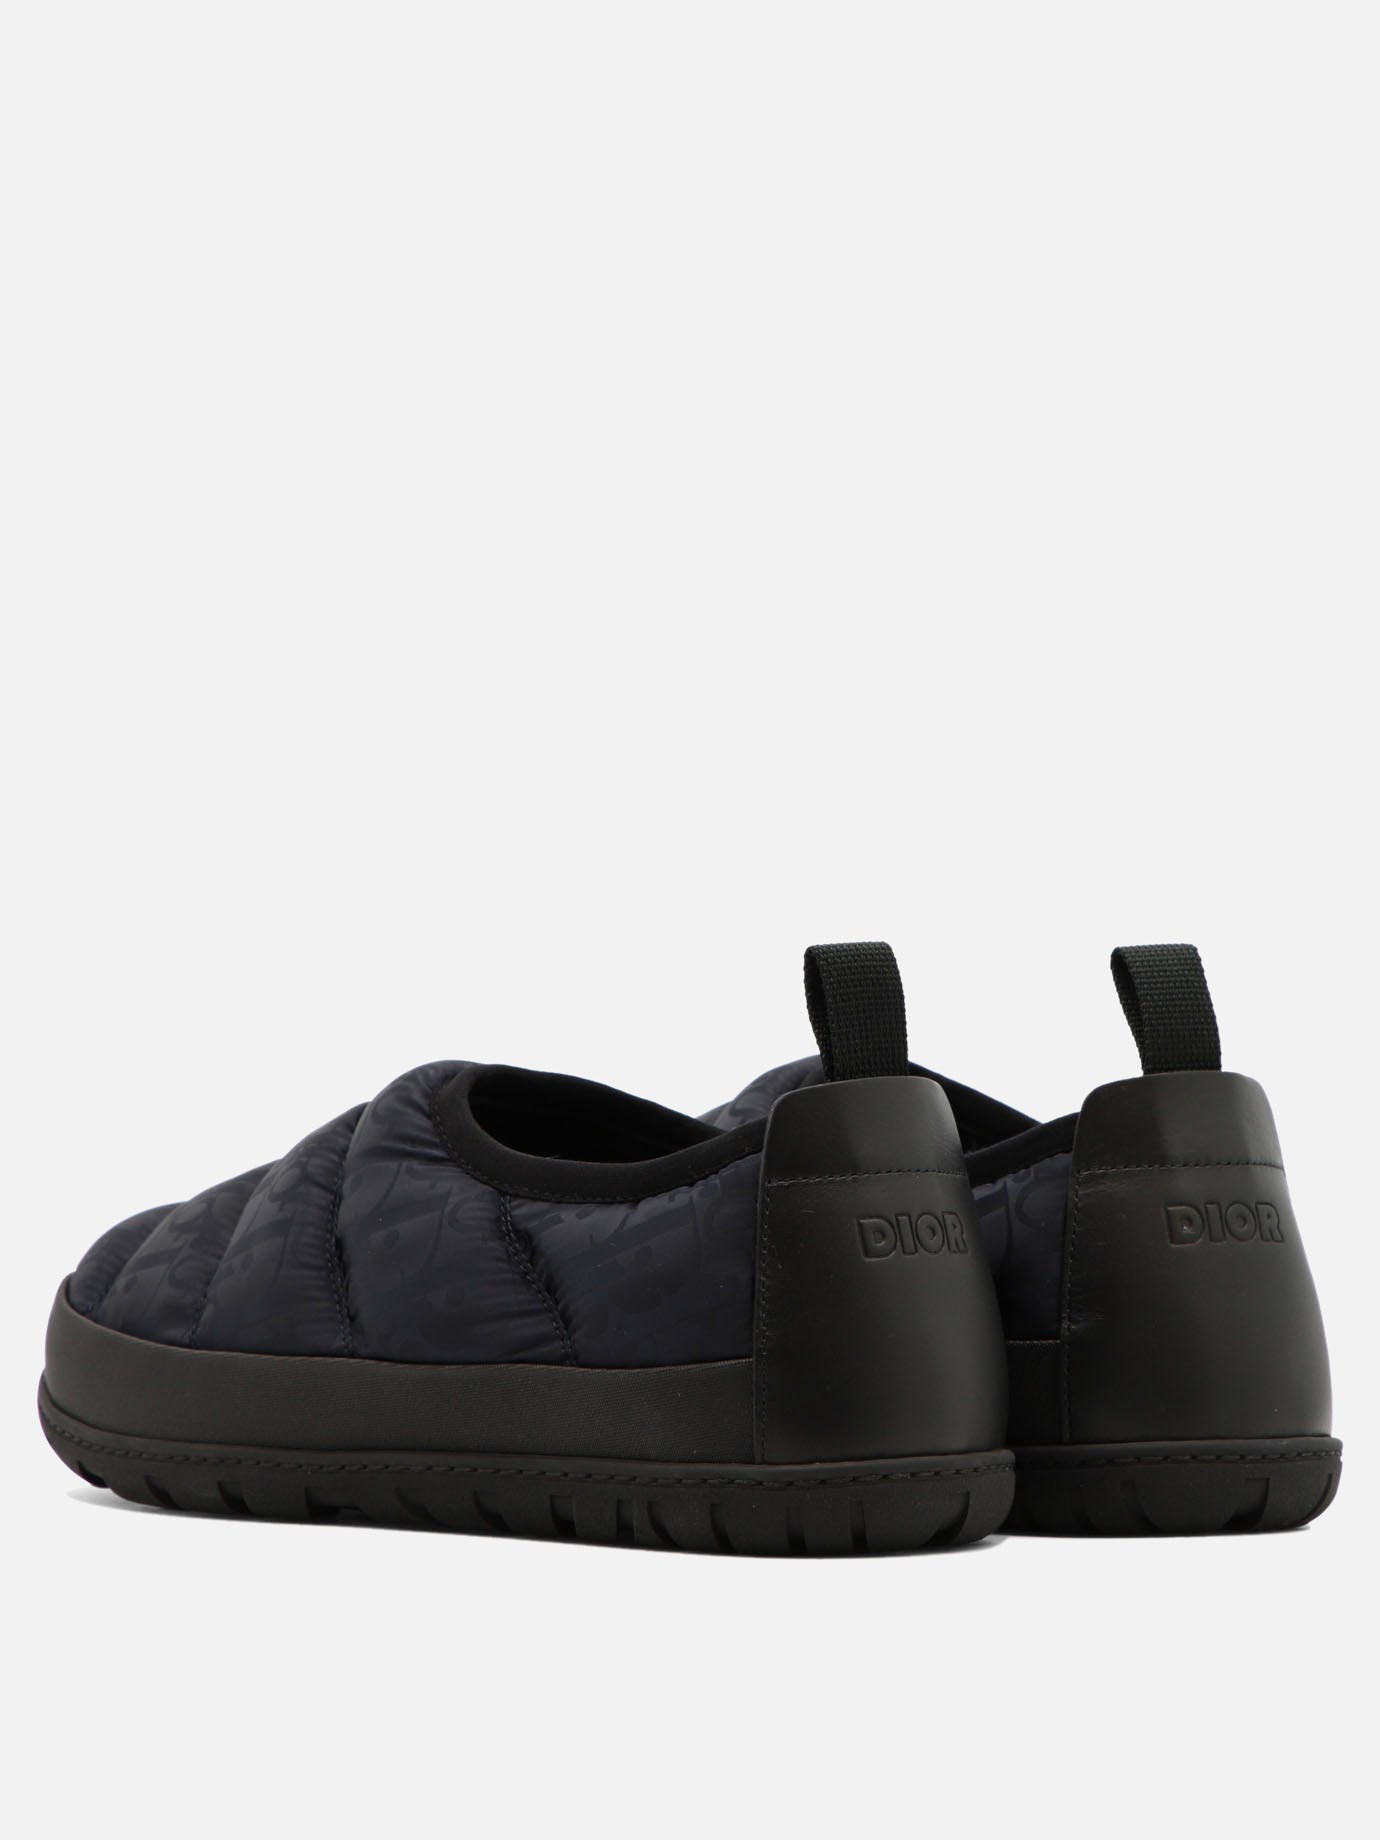  Dior Oblique  slippers by Dior